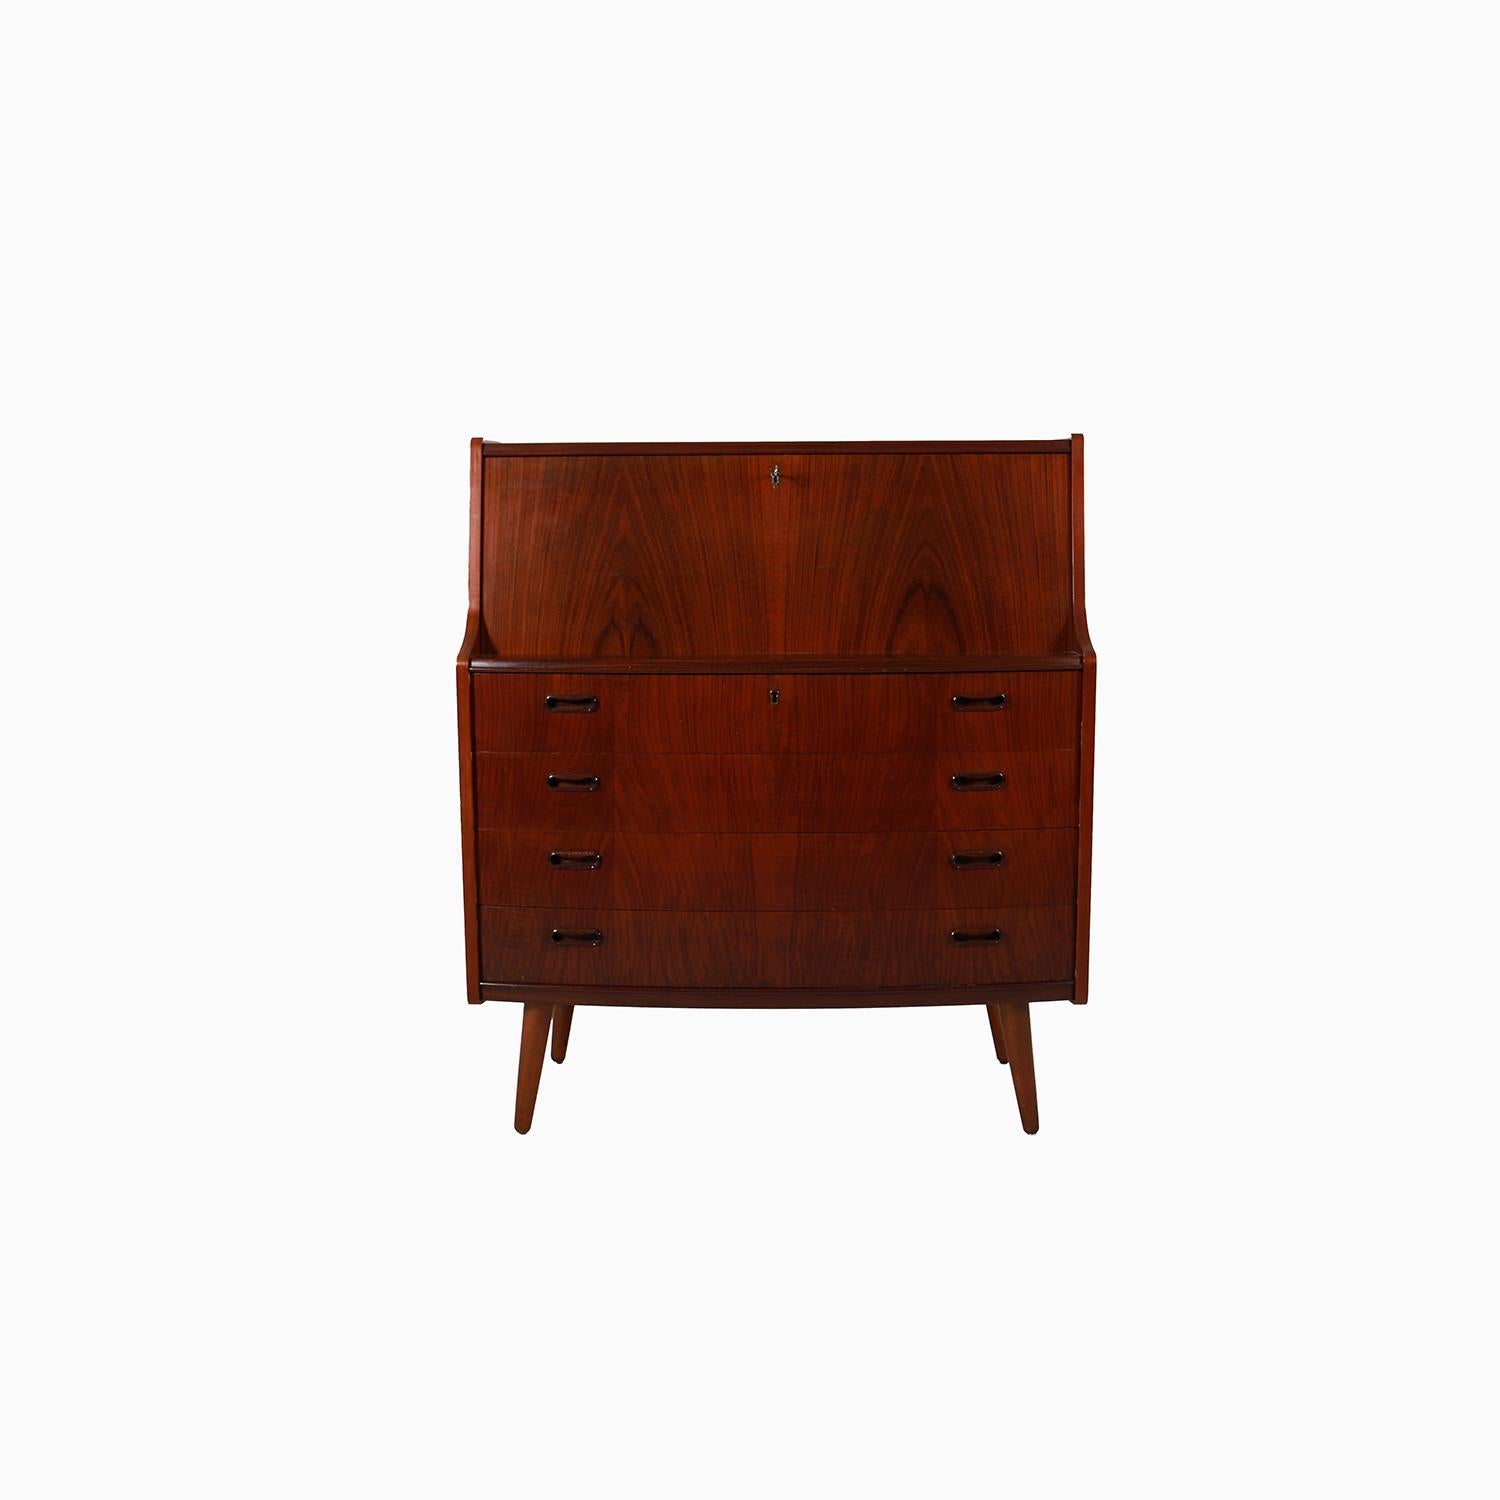 This elegant secretary desk is made from Cuban mahogany, which tends to have a honey colored appearance compared to more ubiquitous forms of the wood.  It would be well placed in an airy foyer or guest suite, or in a diminutive study situation.  